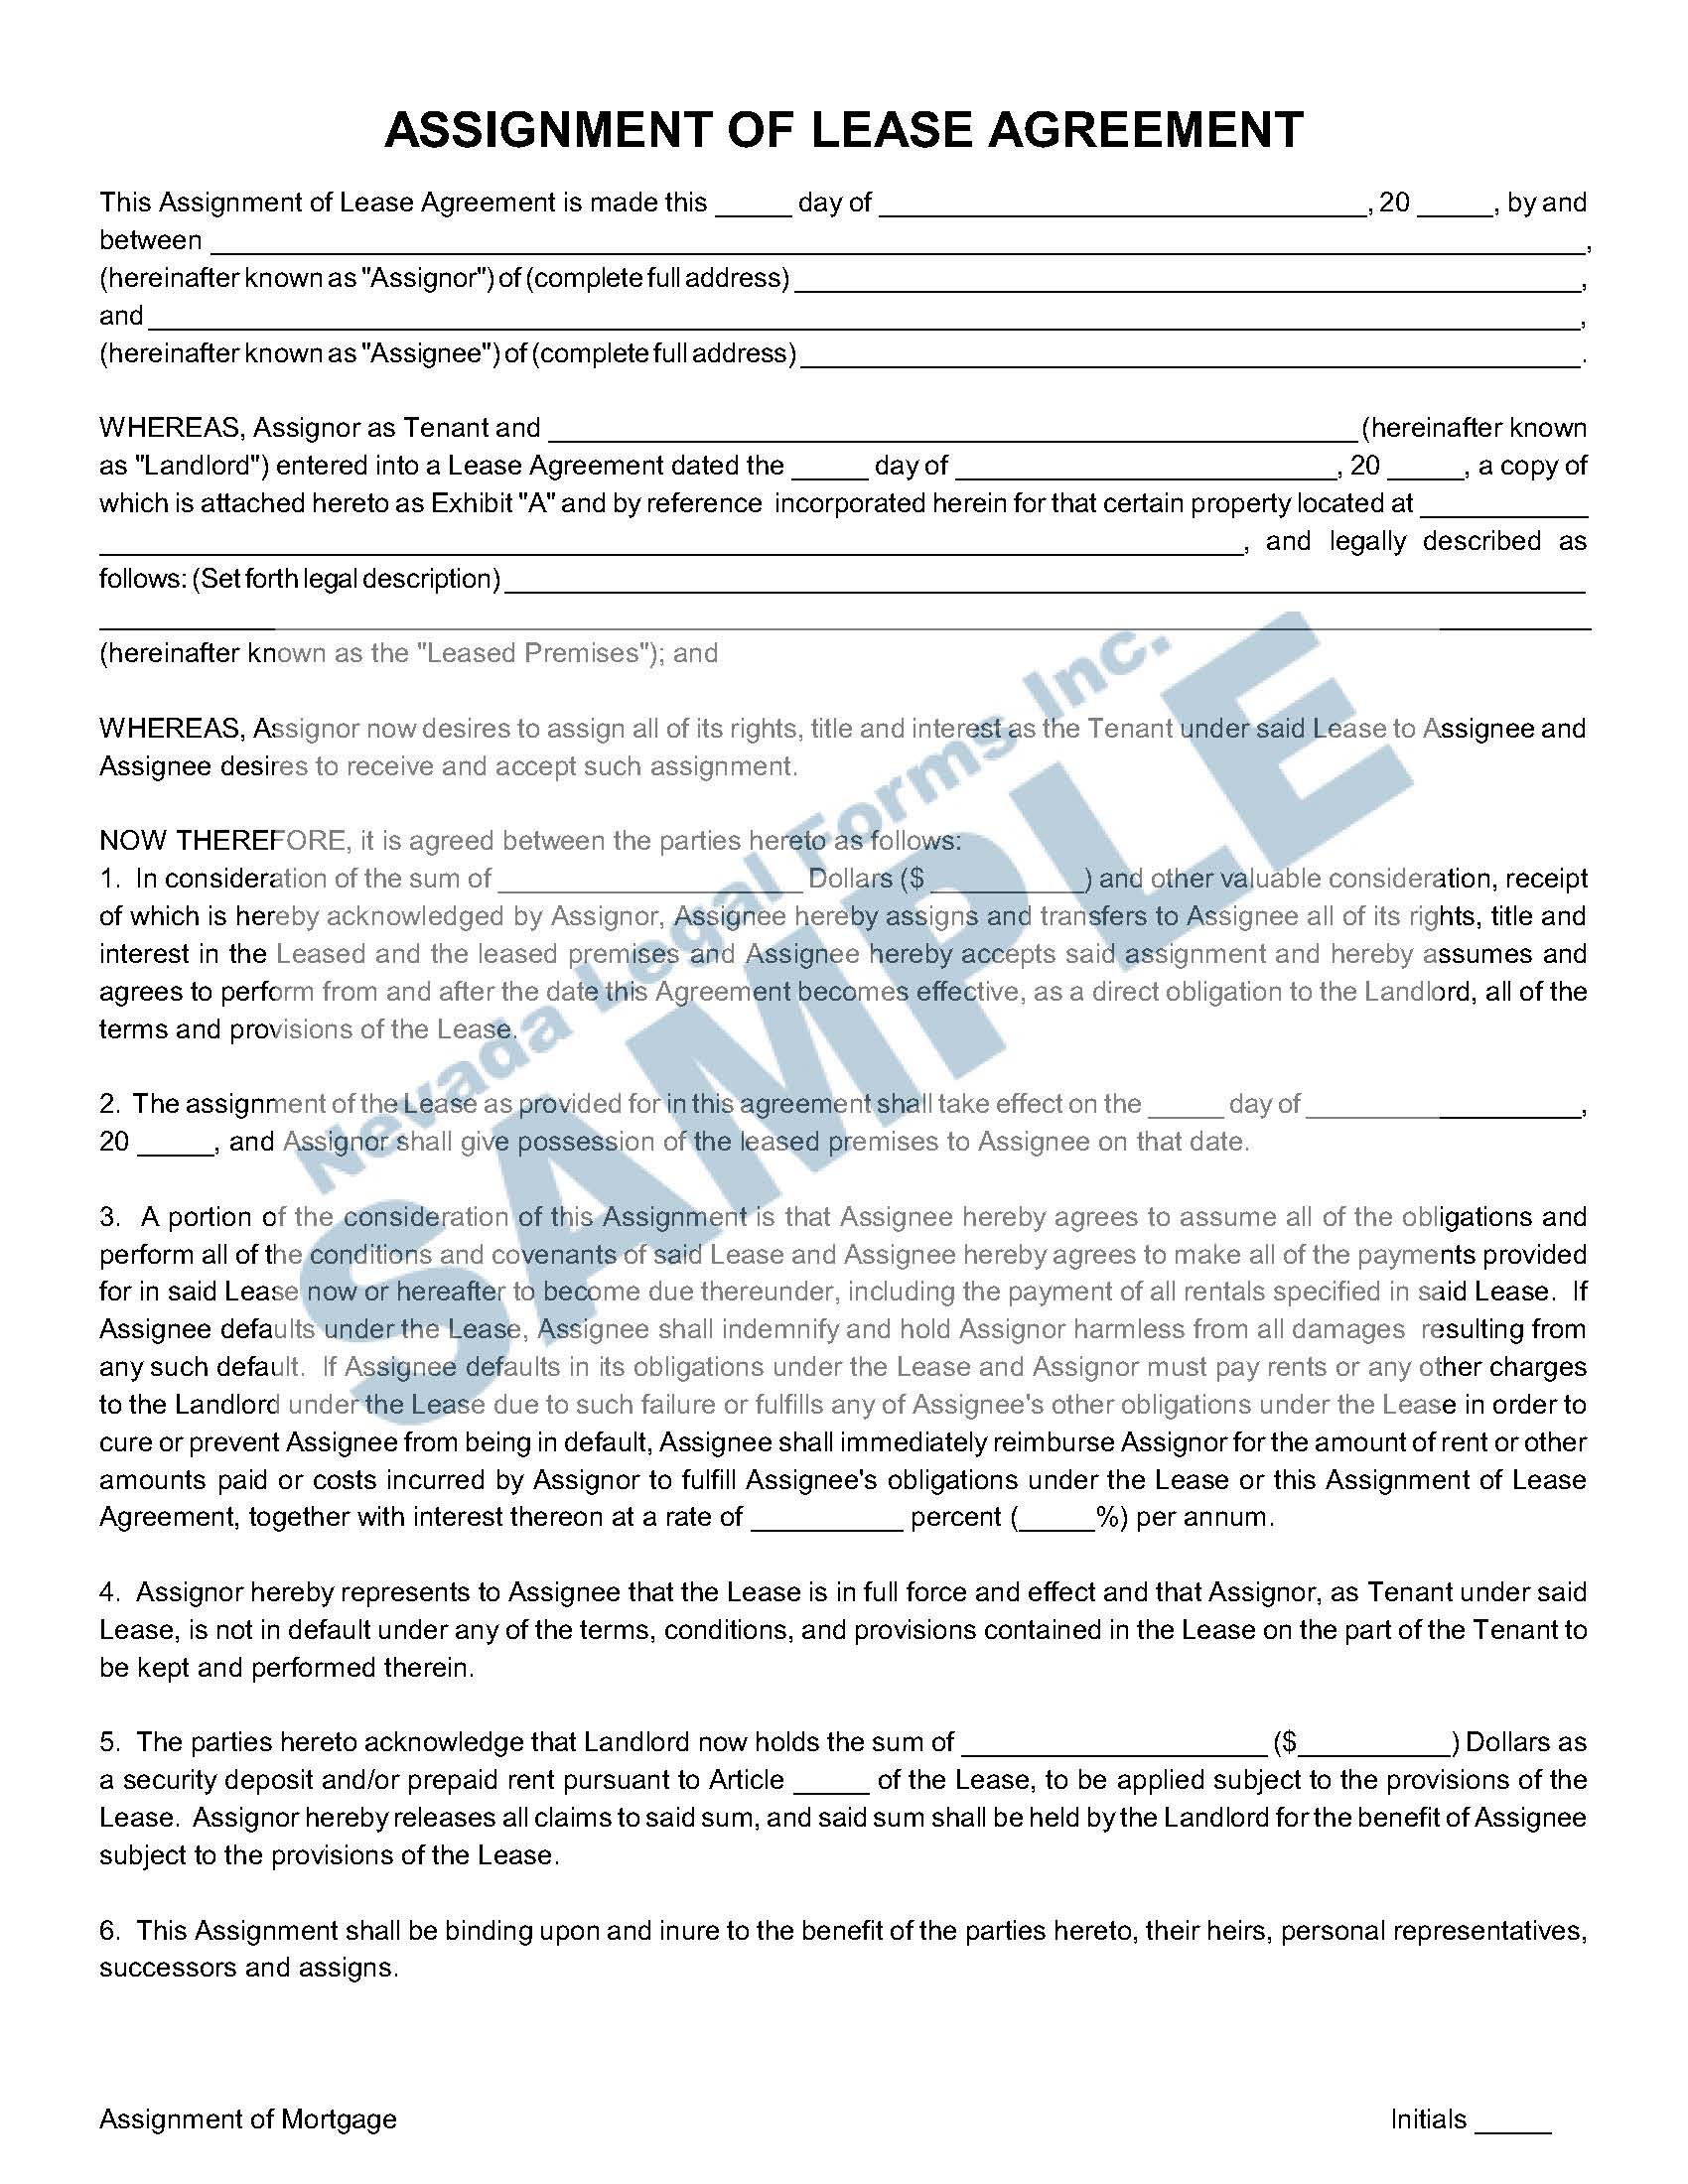 assignment agreement lease